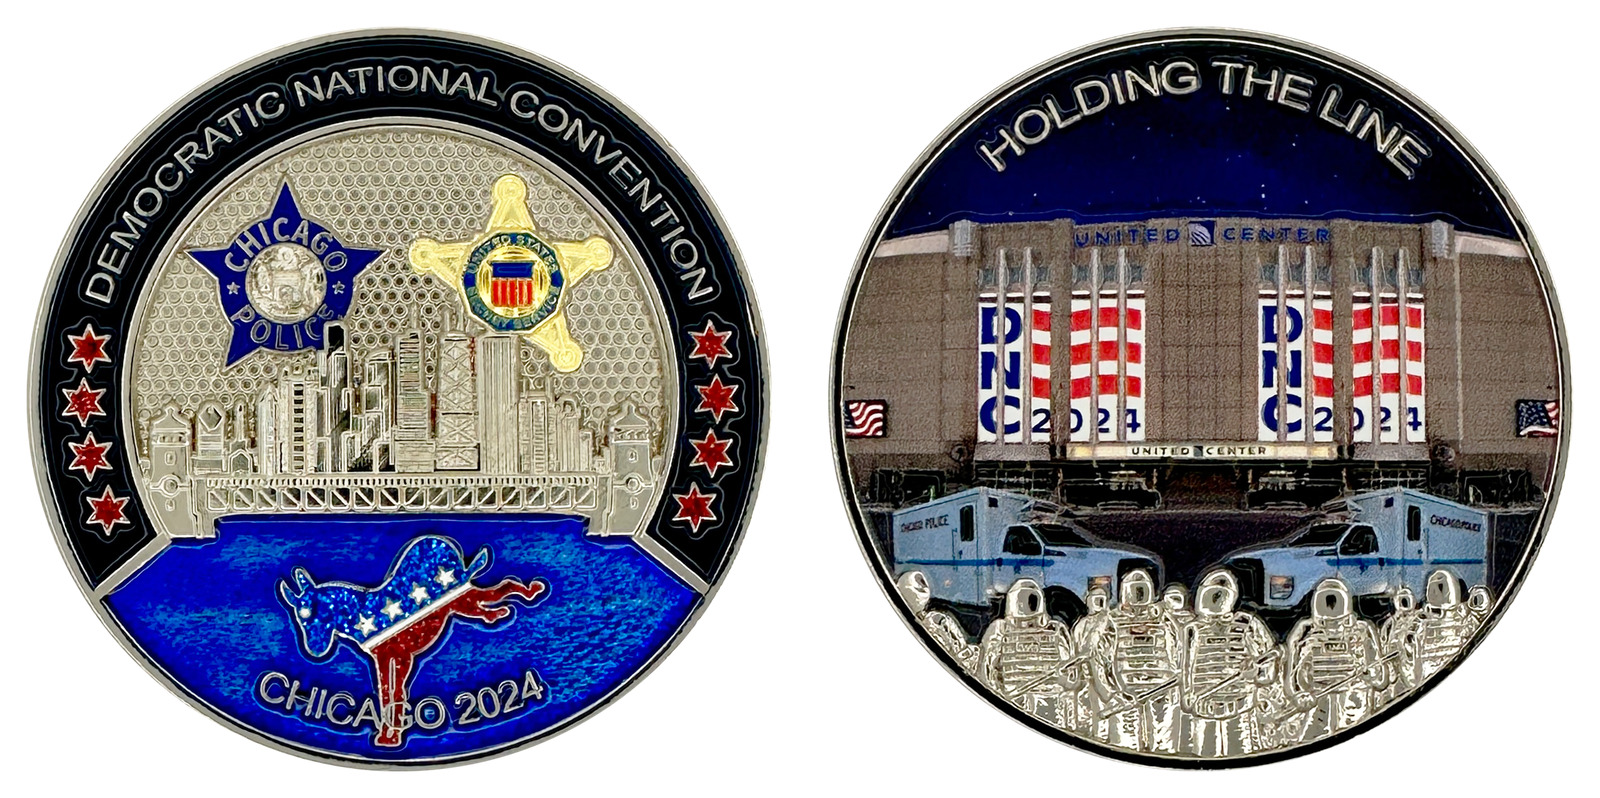 DEMOCRATIC NATIONAL CONVENTION (DNC) CHALLENGE COIN: Chicago 2024, Size: 2″